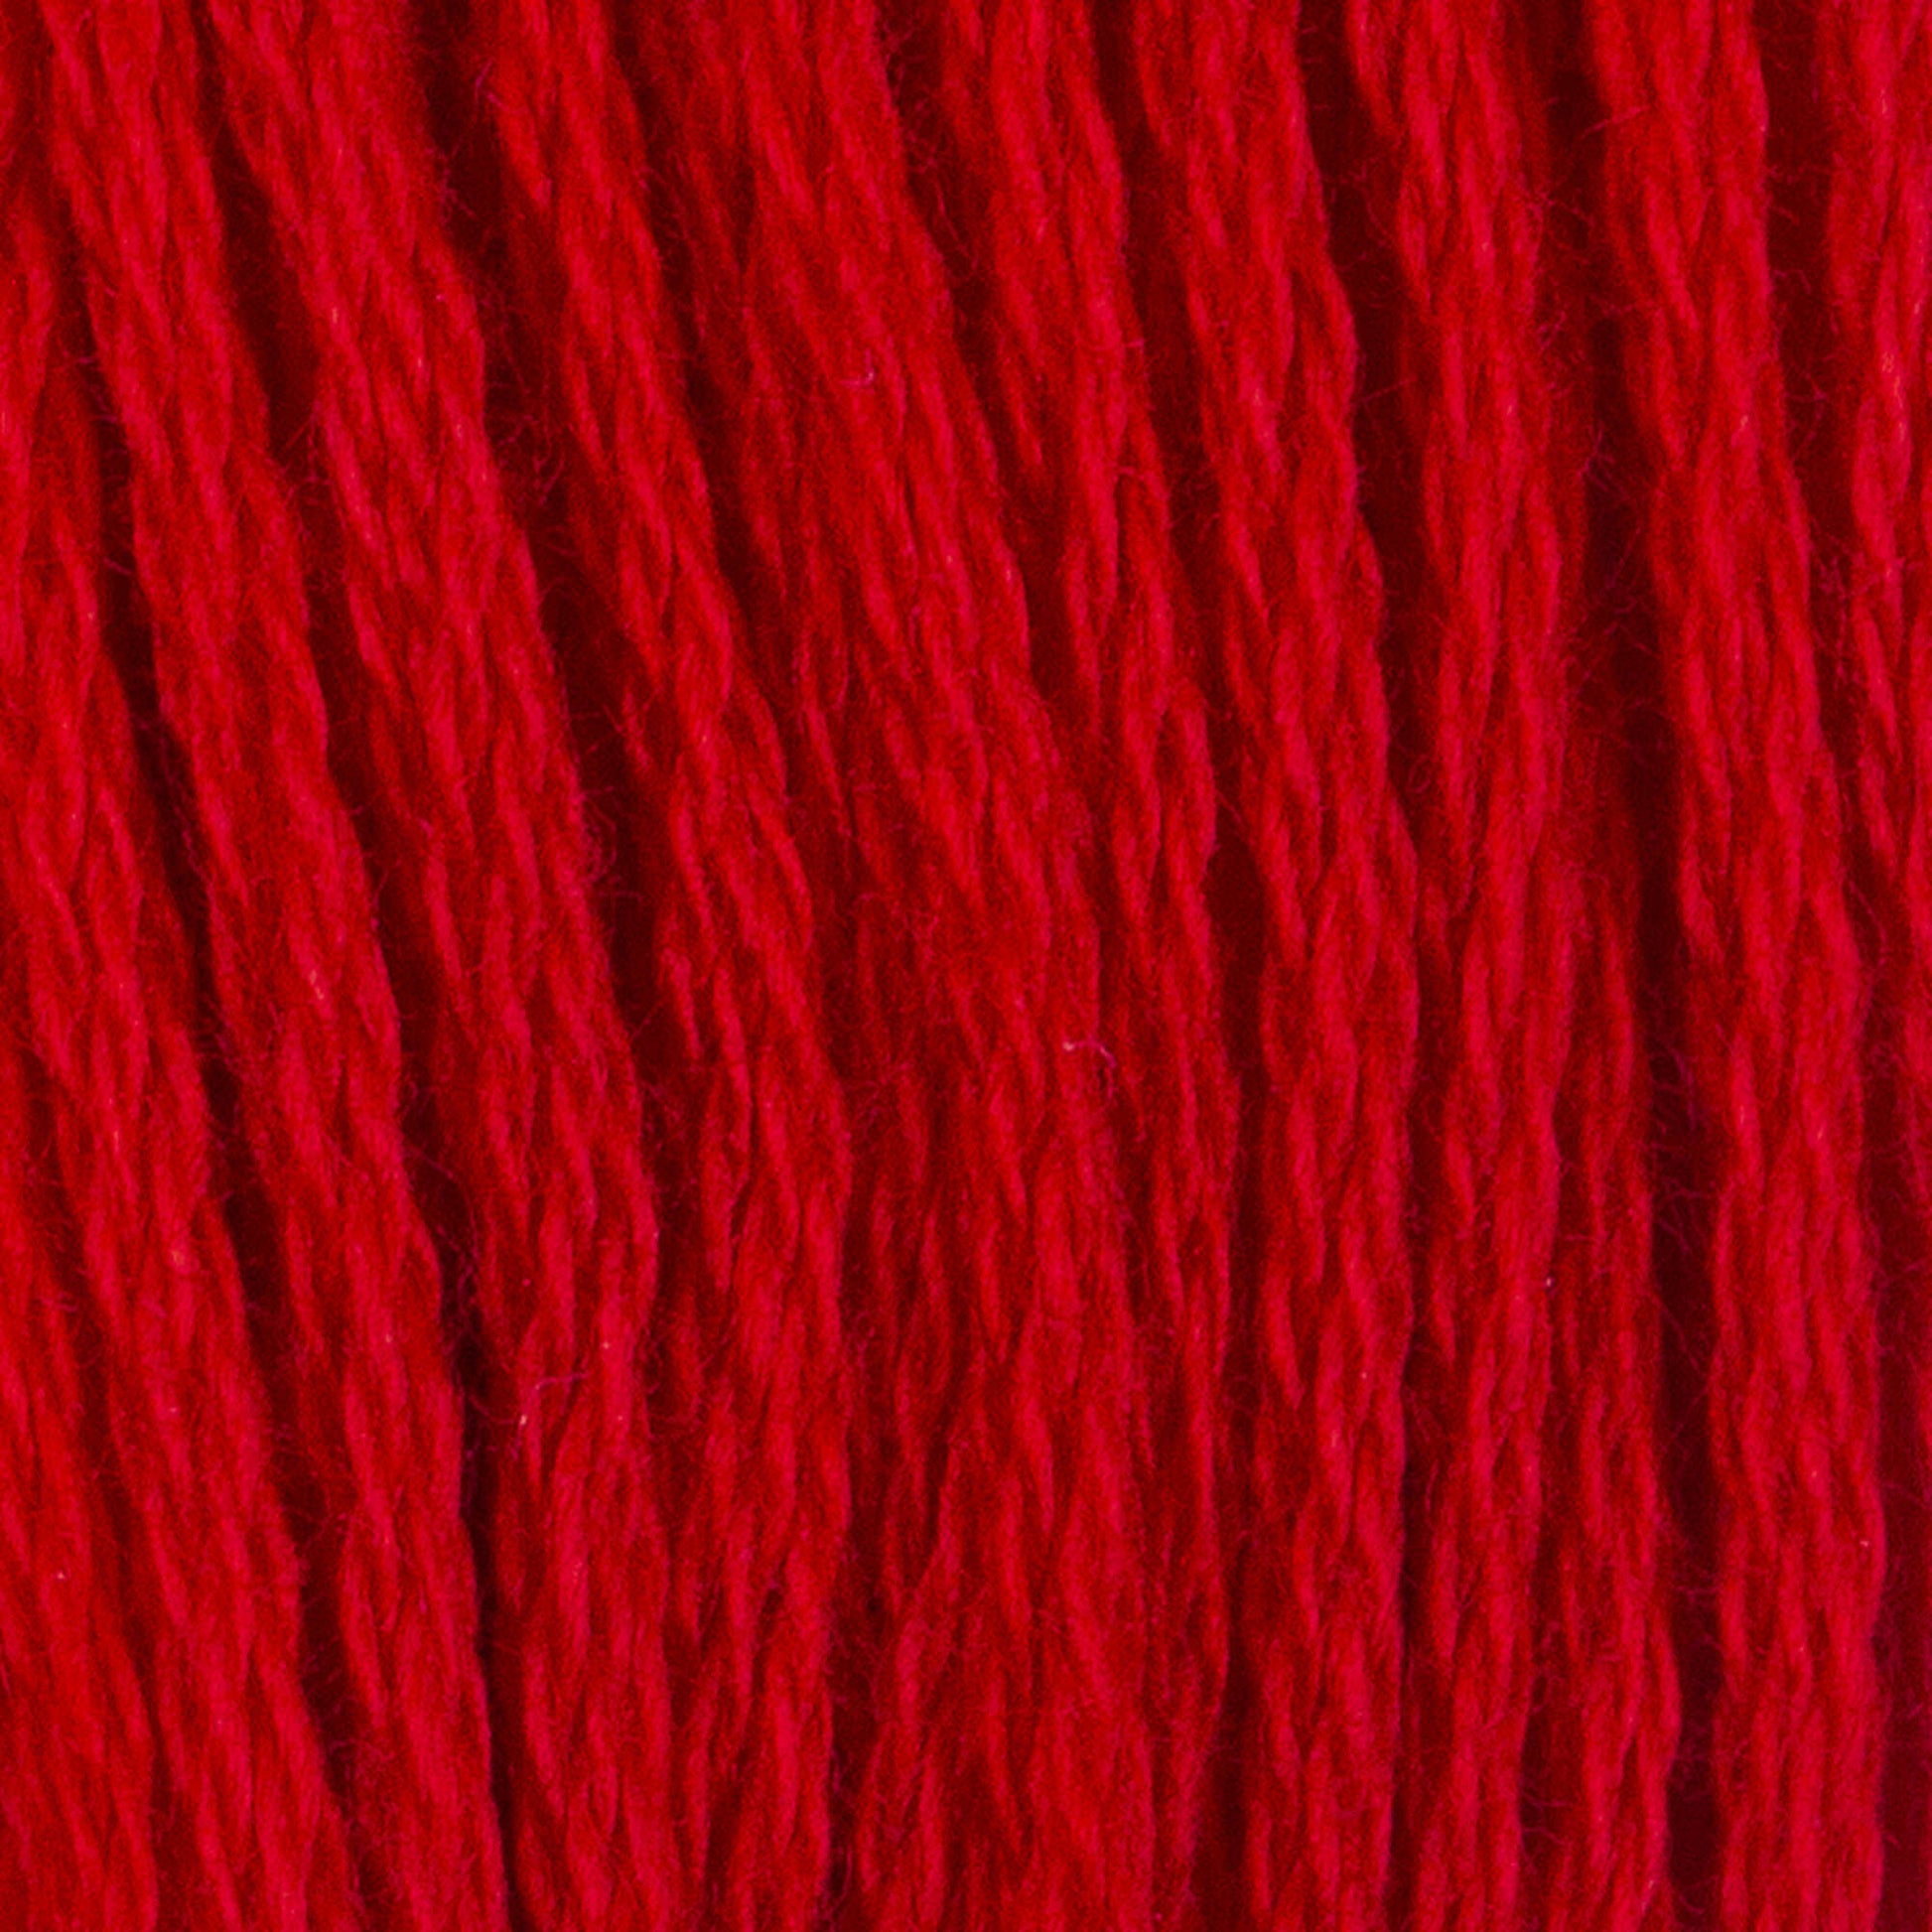 Coats & Clark Cotton Embroidery Floss Christmas Red